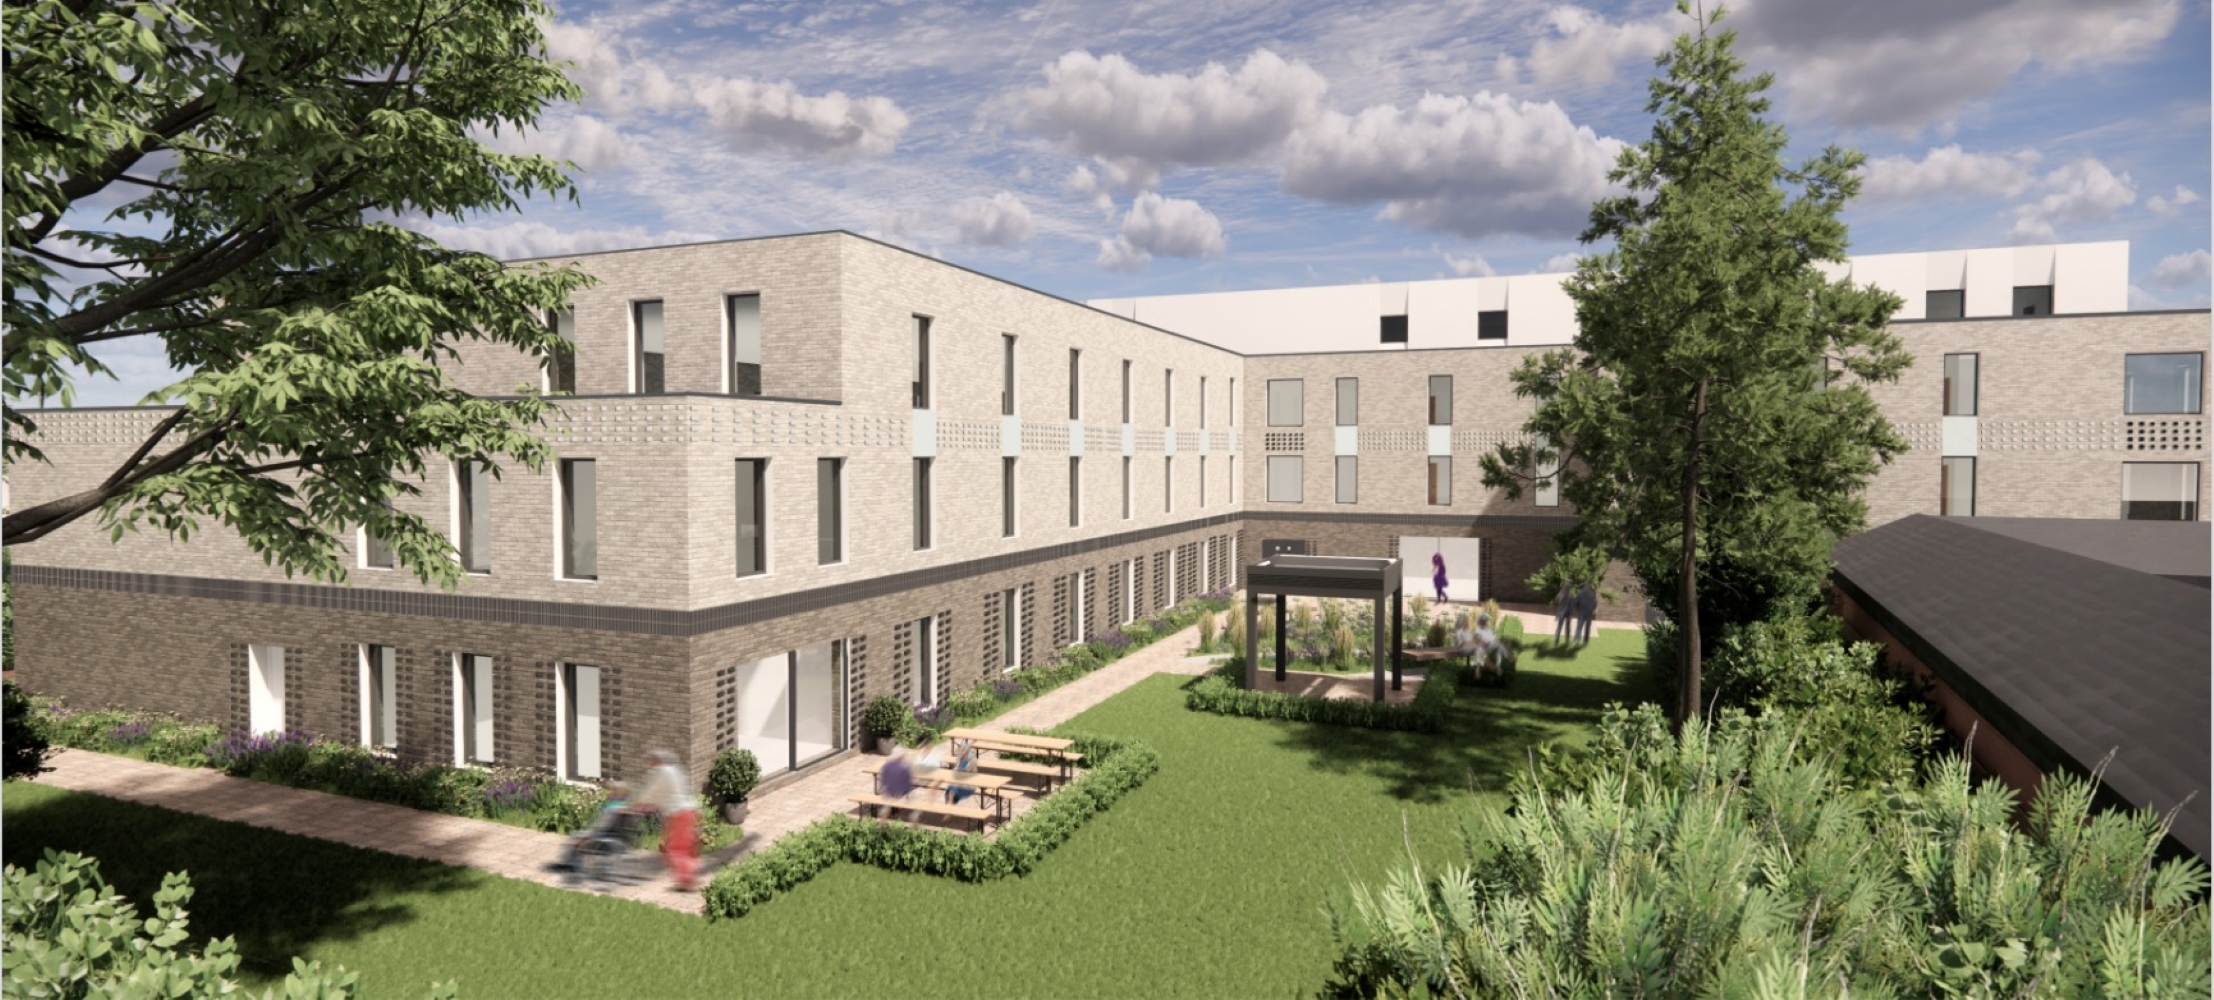 Mixed-use Development in Middleton, Greater Manchester - CGI